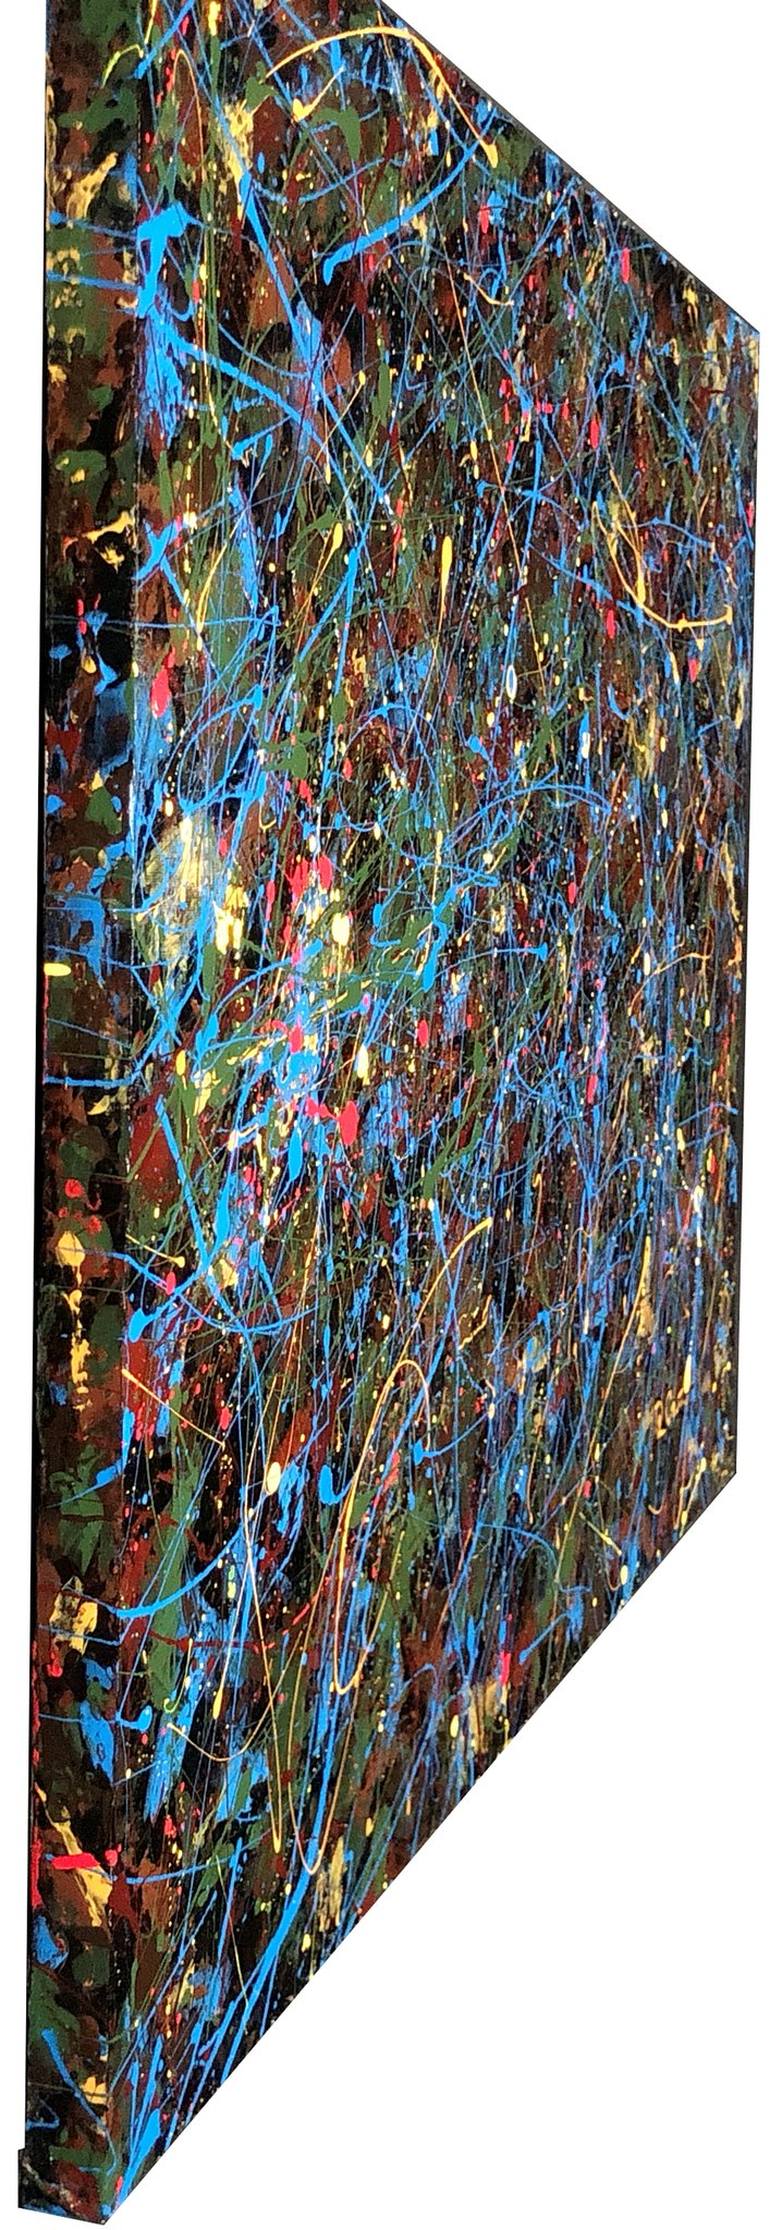 Original Abstract Painting by Darryl Grant